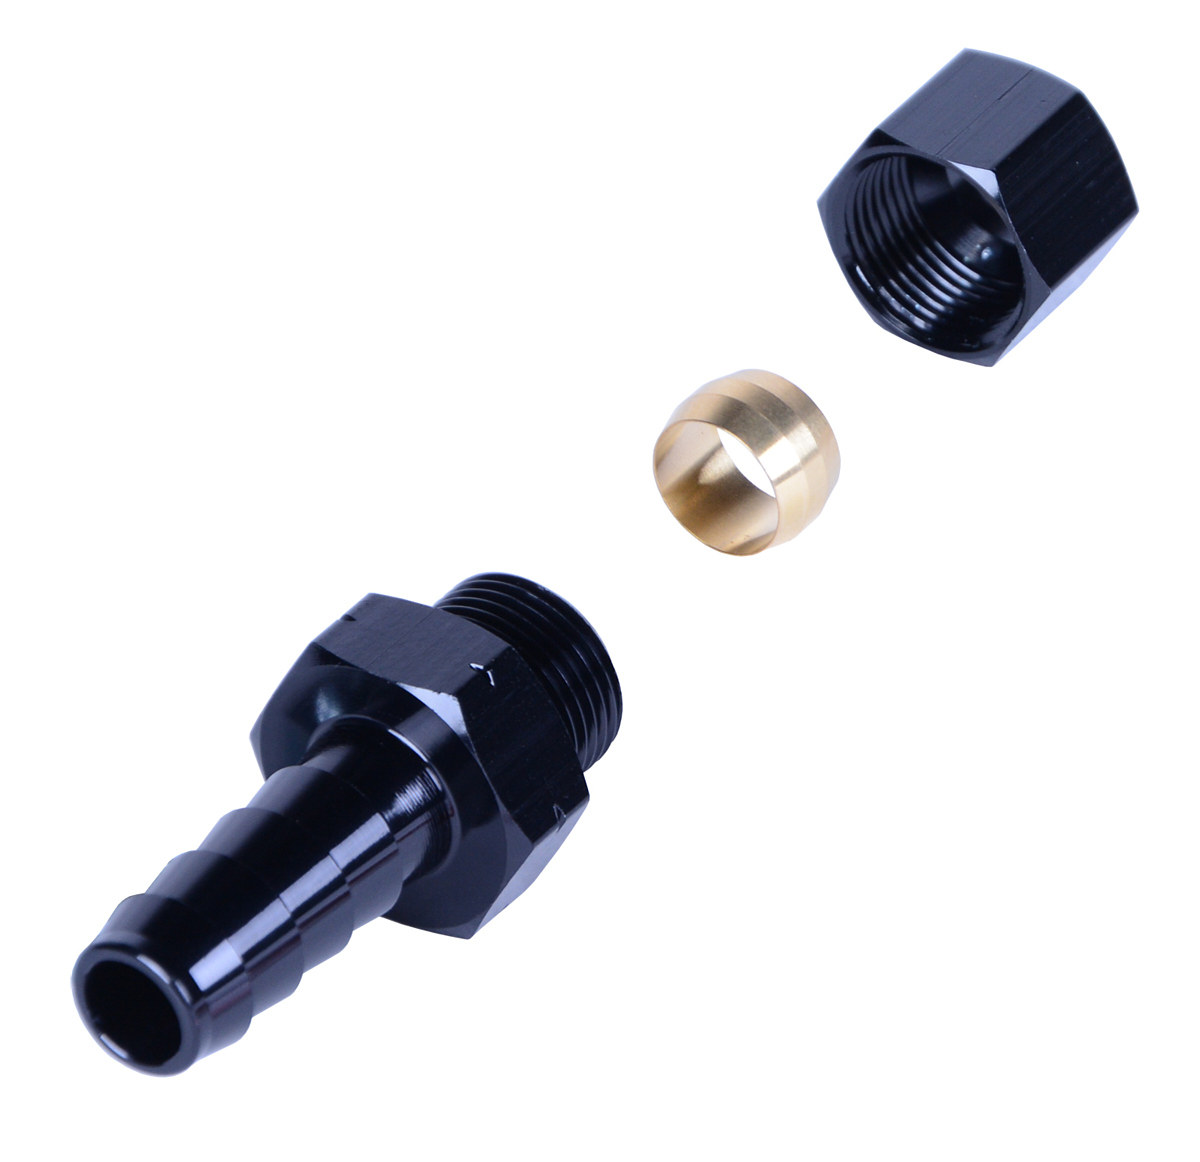 Derale 13043 Fitting, Adapter, Straight, 1/2 in Compression Fitting to 1/2 in Hose Barb, Aluminum, Black Anodized, Each